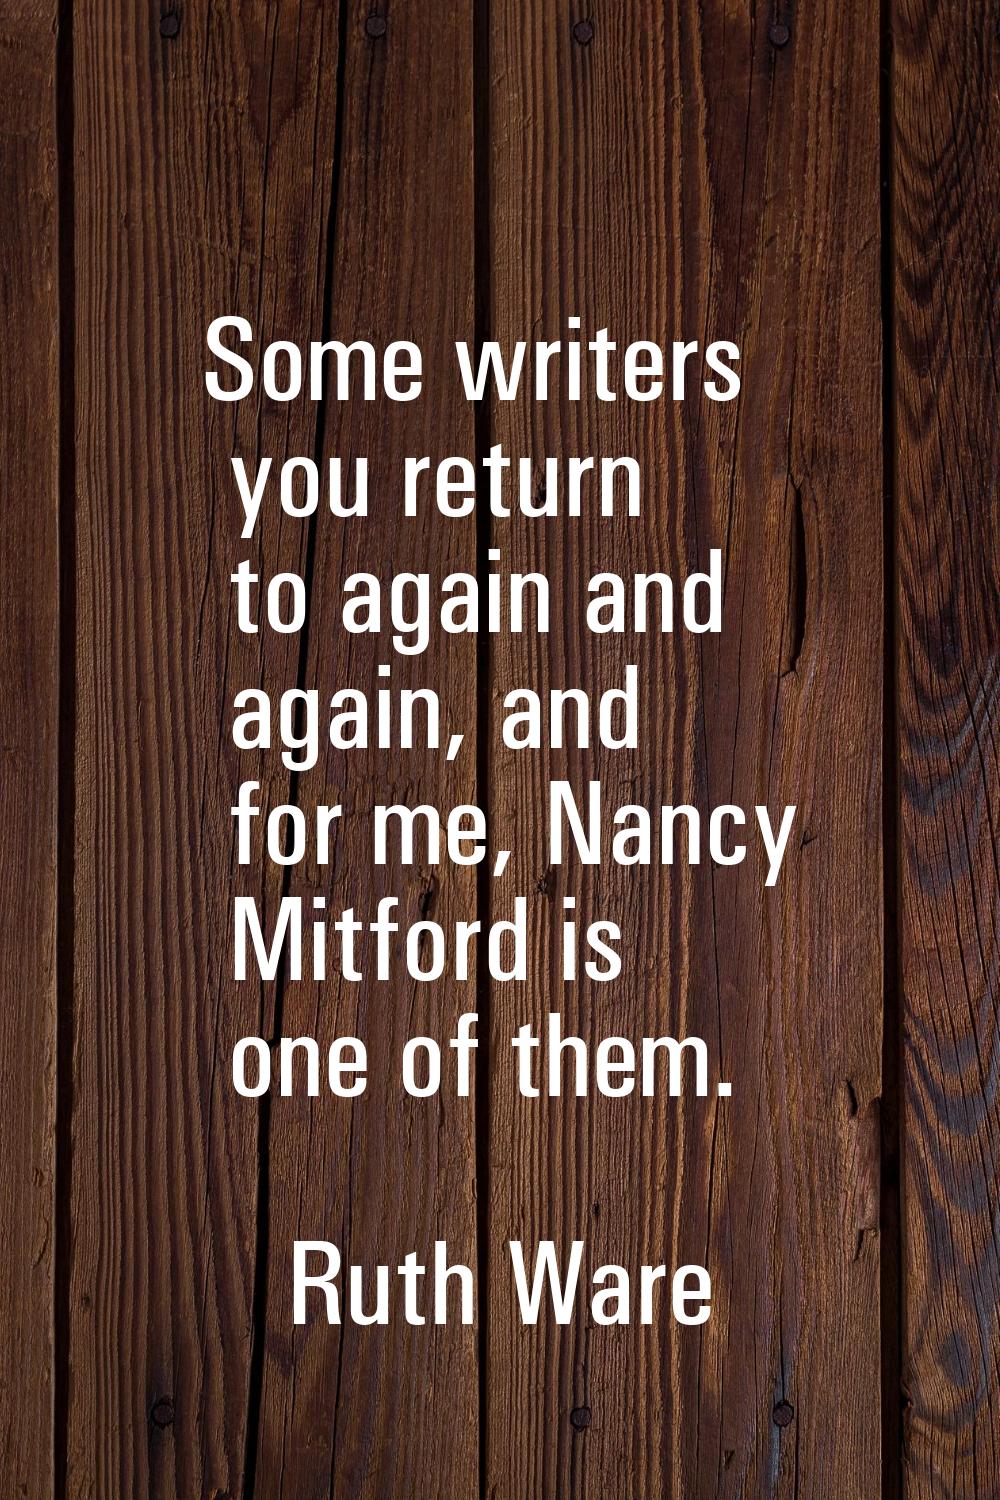 Some writers you return to again and again, and for me, Nancy Mitford is one of them.